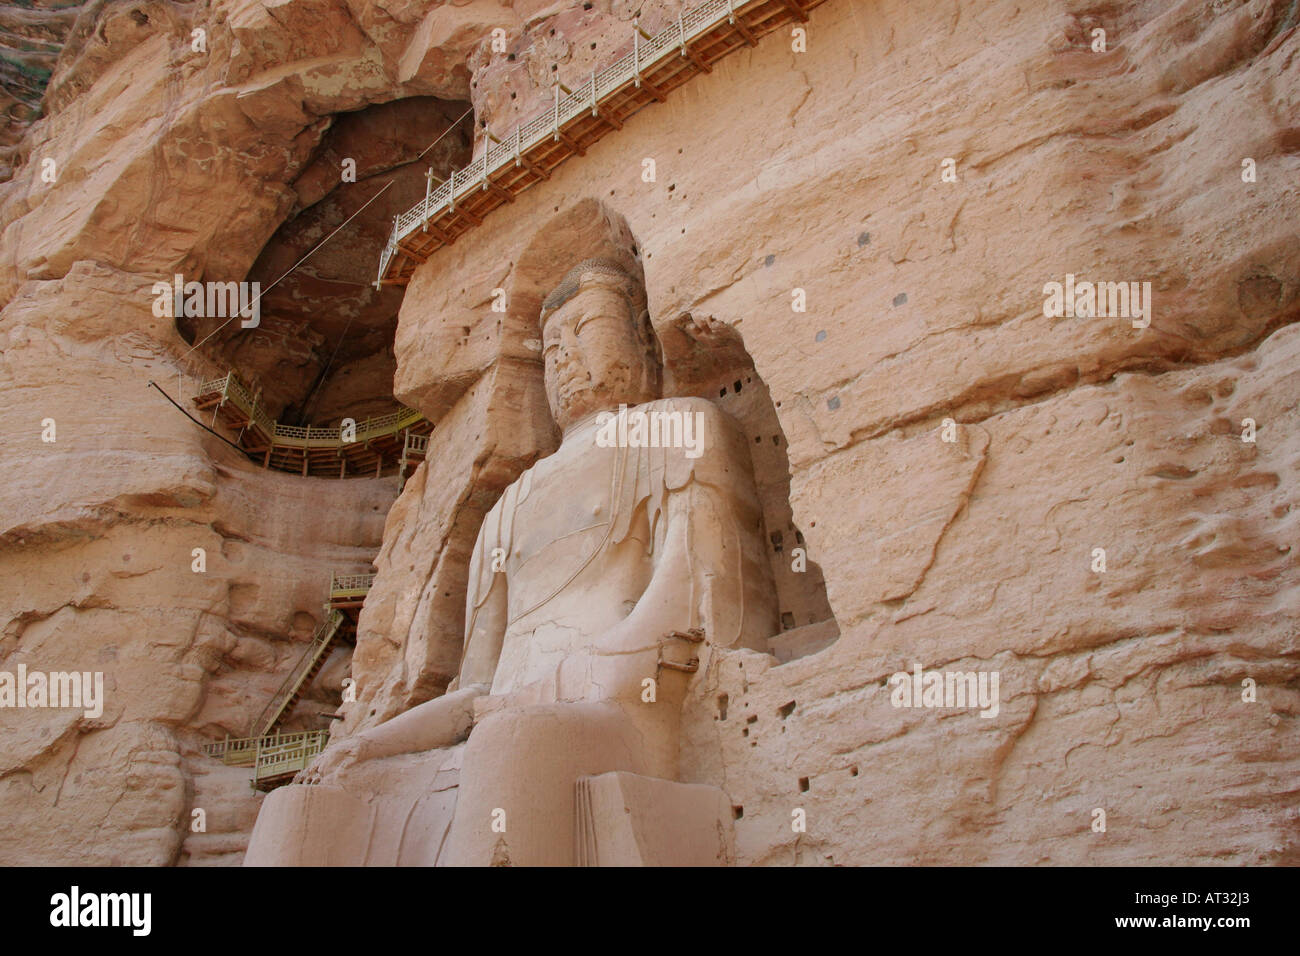 Maitreya, the future buddha statue at Bingling Si, Buddhist Grottoes, off a branch of the Yellow River, China Stock Photo